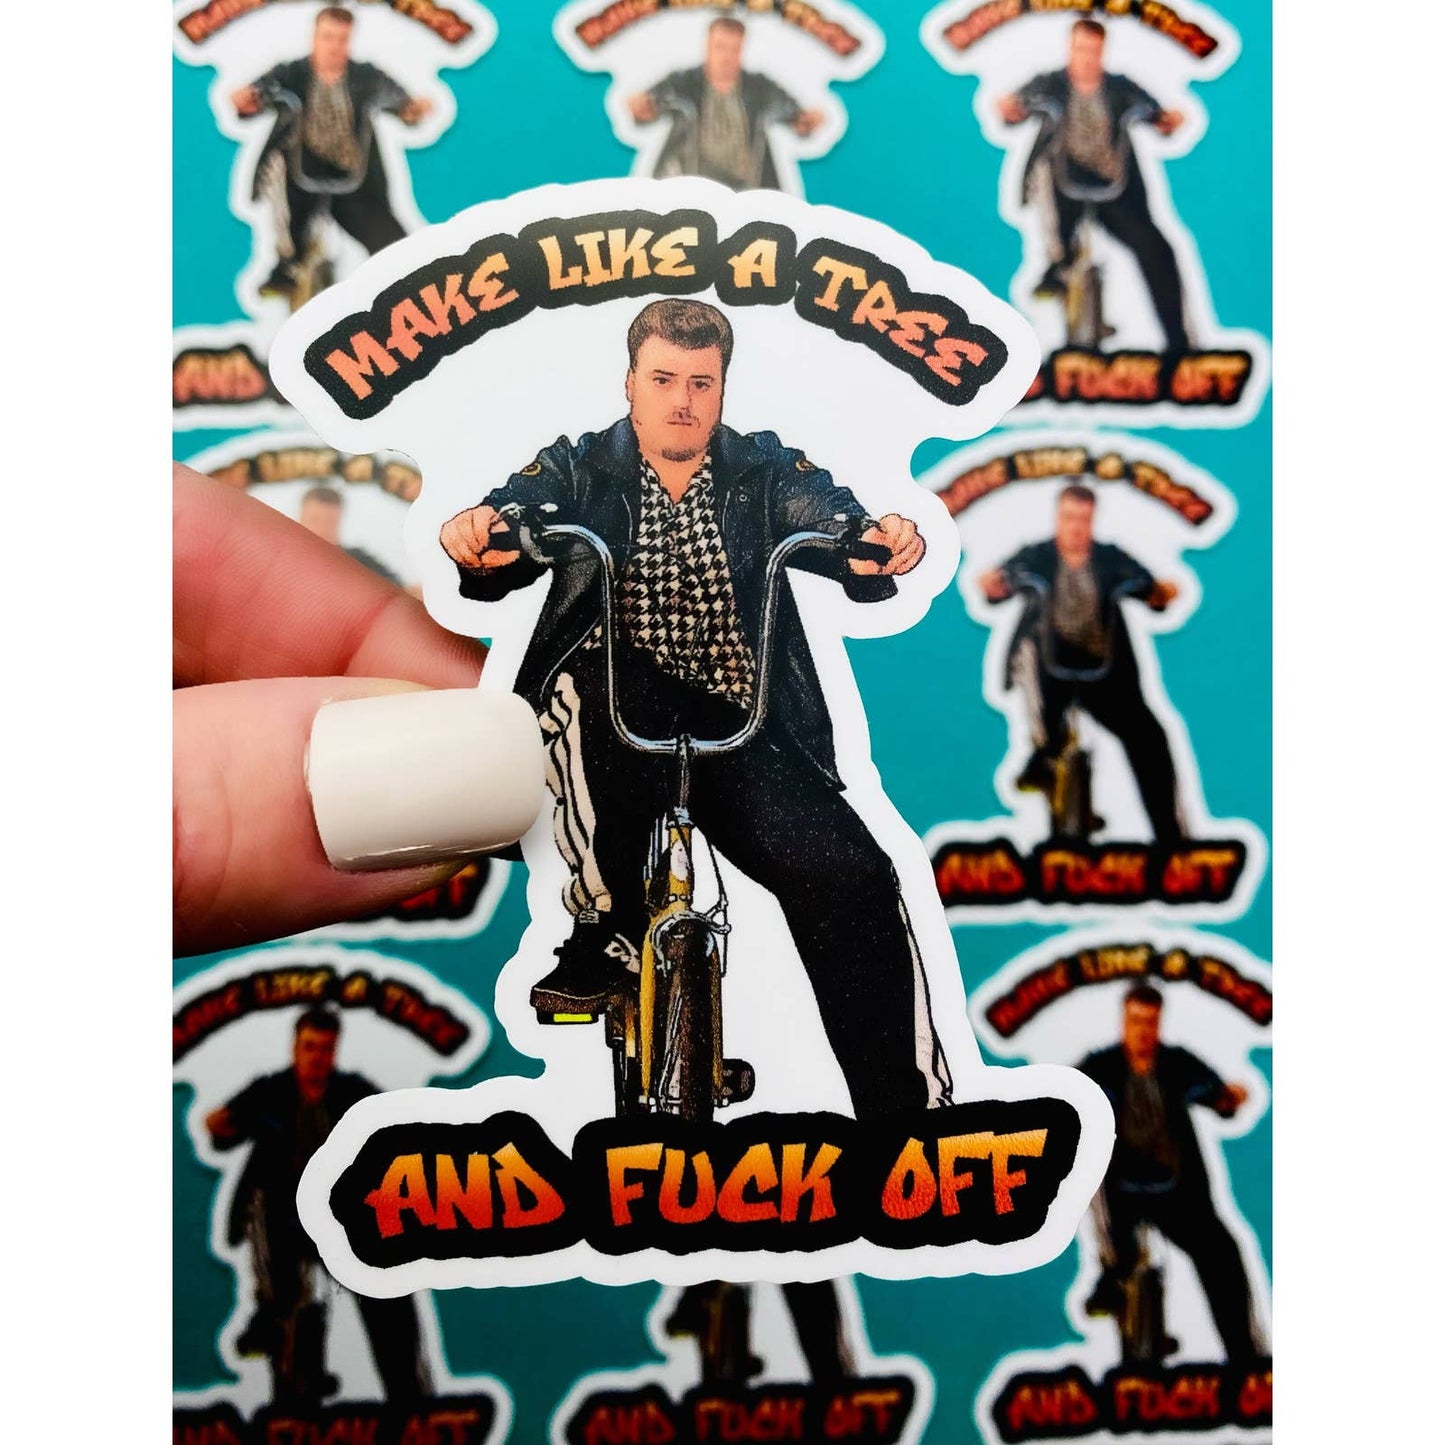 Trailer Park Boys Ricky Sticker | Make Like A Tree and Fuck Off | Officially Licensed Trailer Park Boys Sticker | Stickers for Men